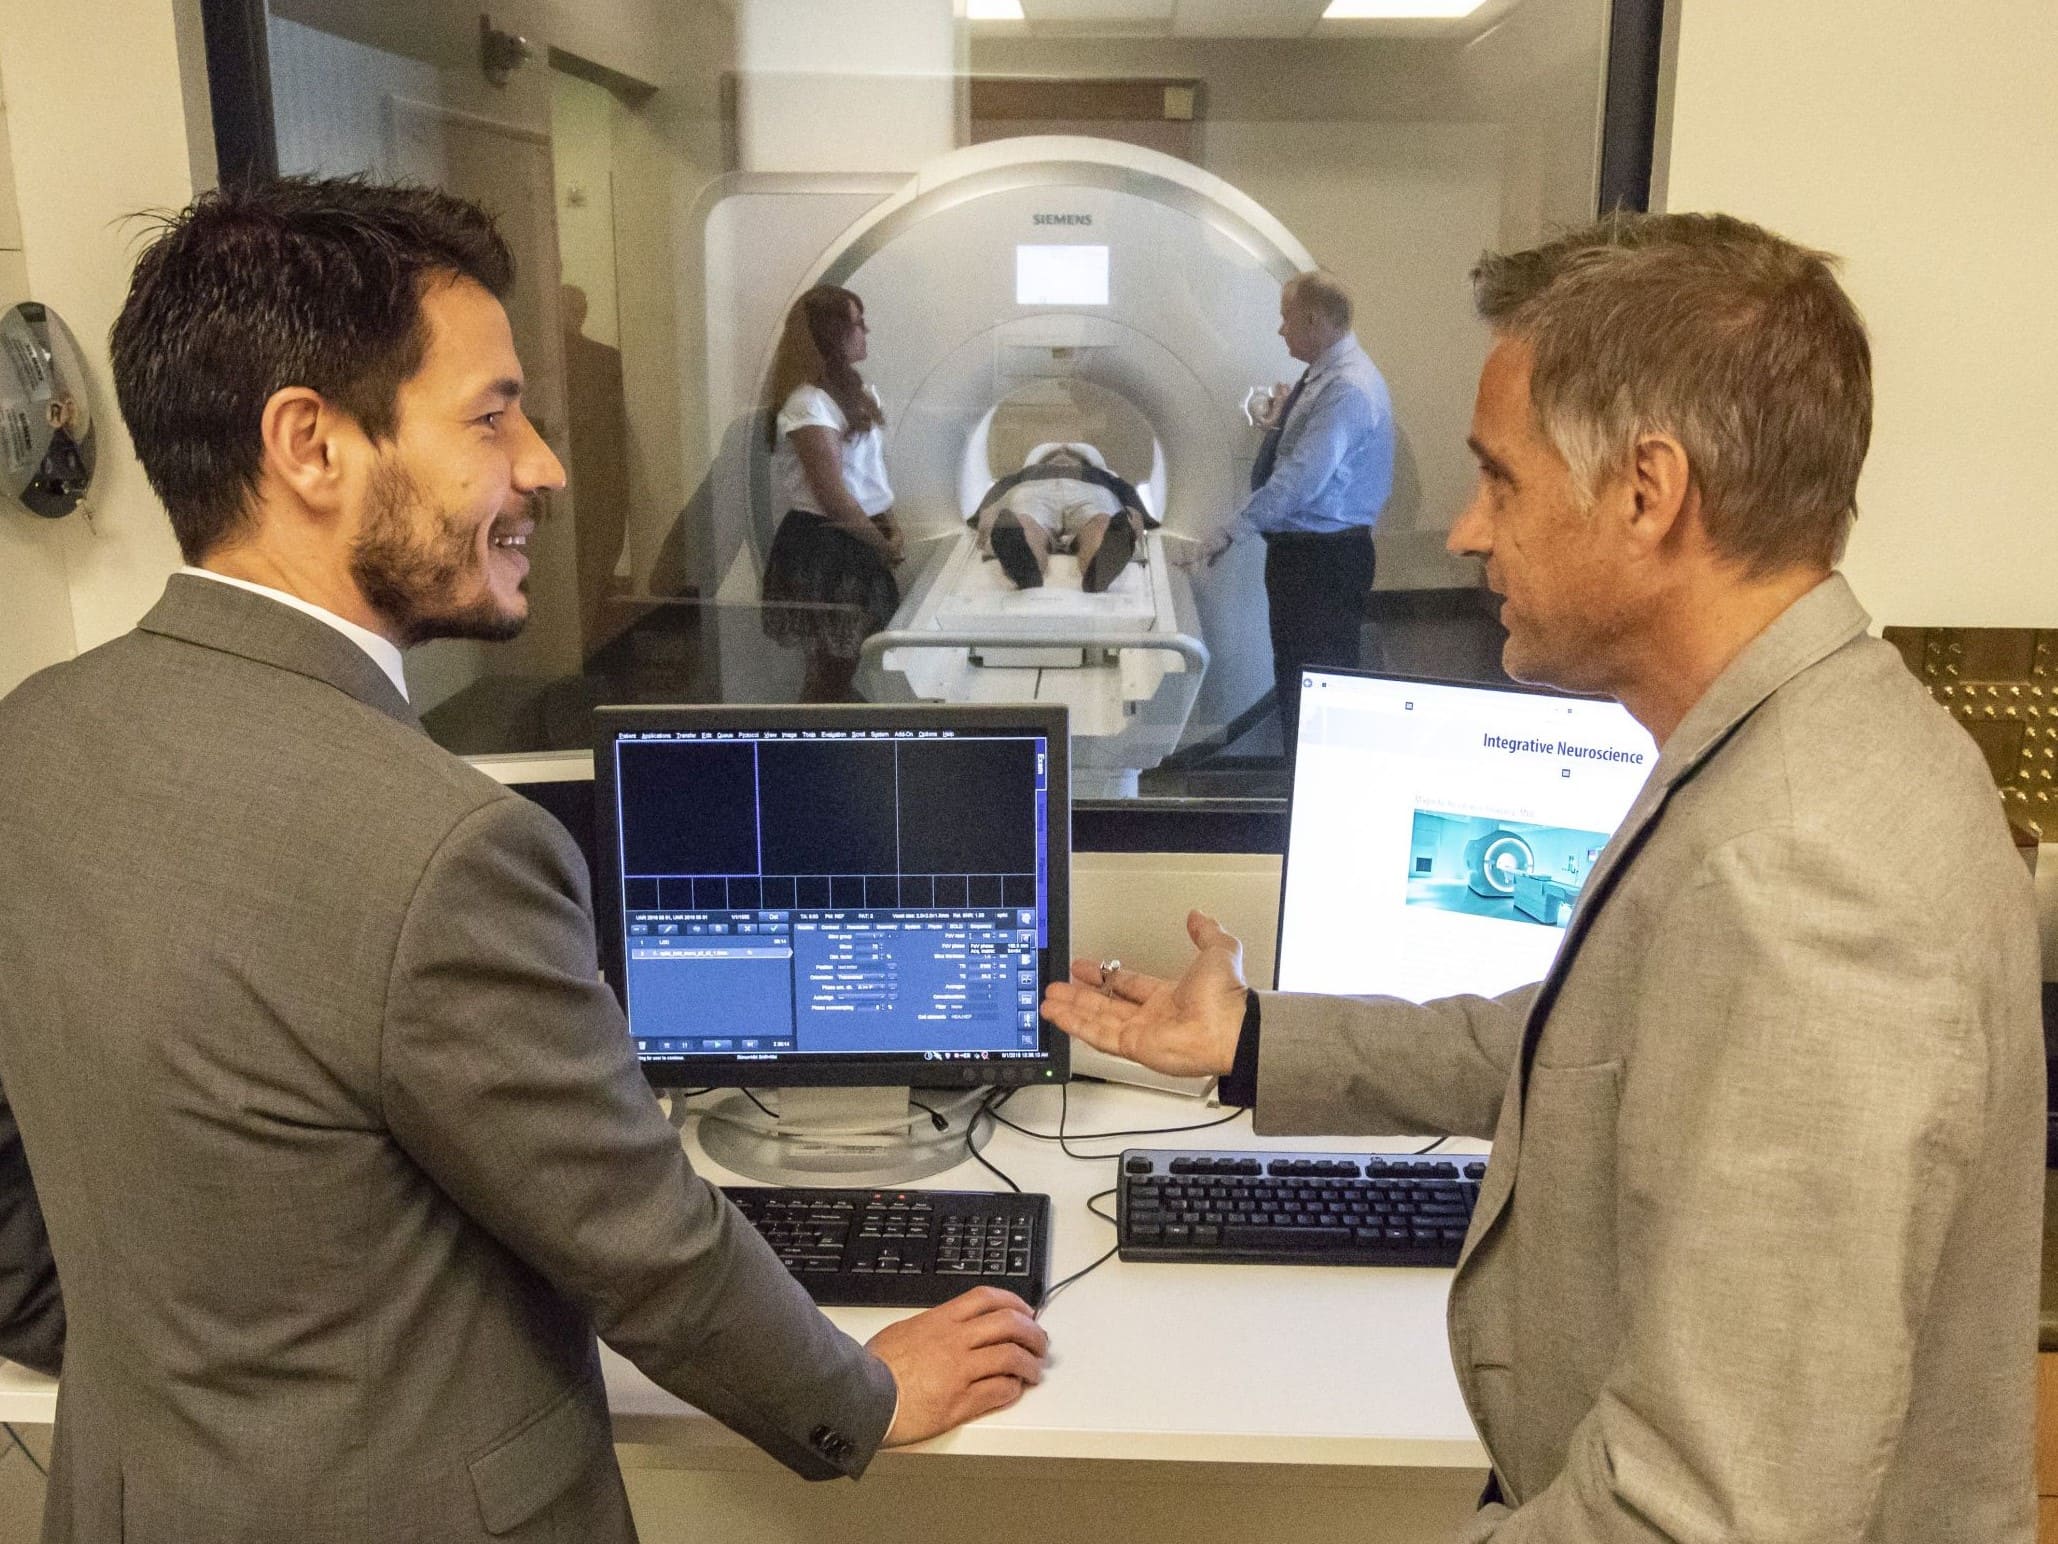 A representative of Siemens and the University's neuroscience imaging director confer as an fMRI is conducted.